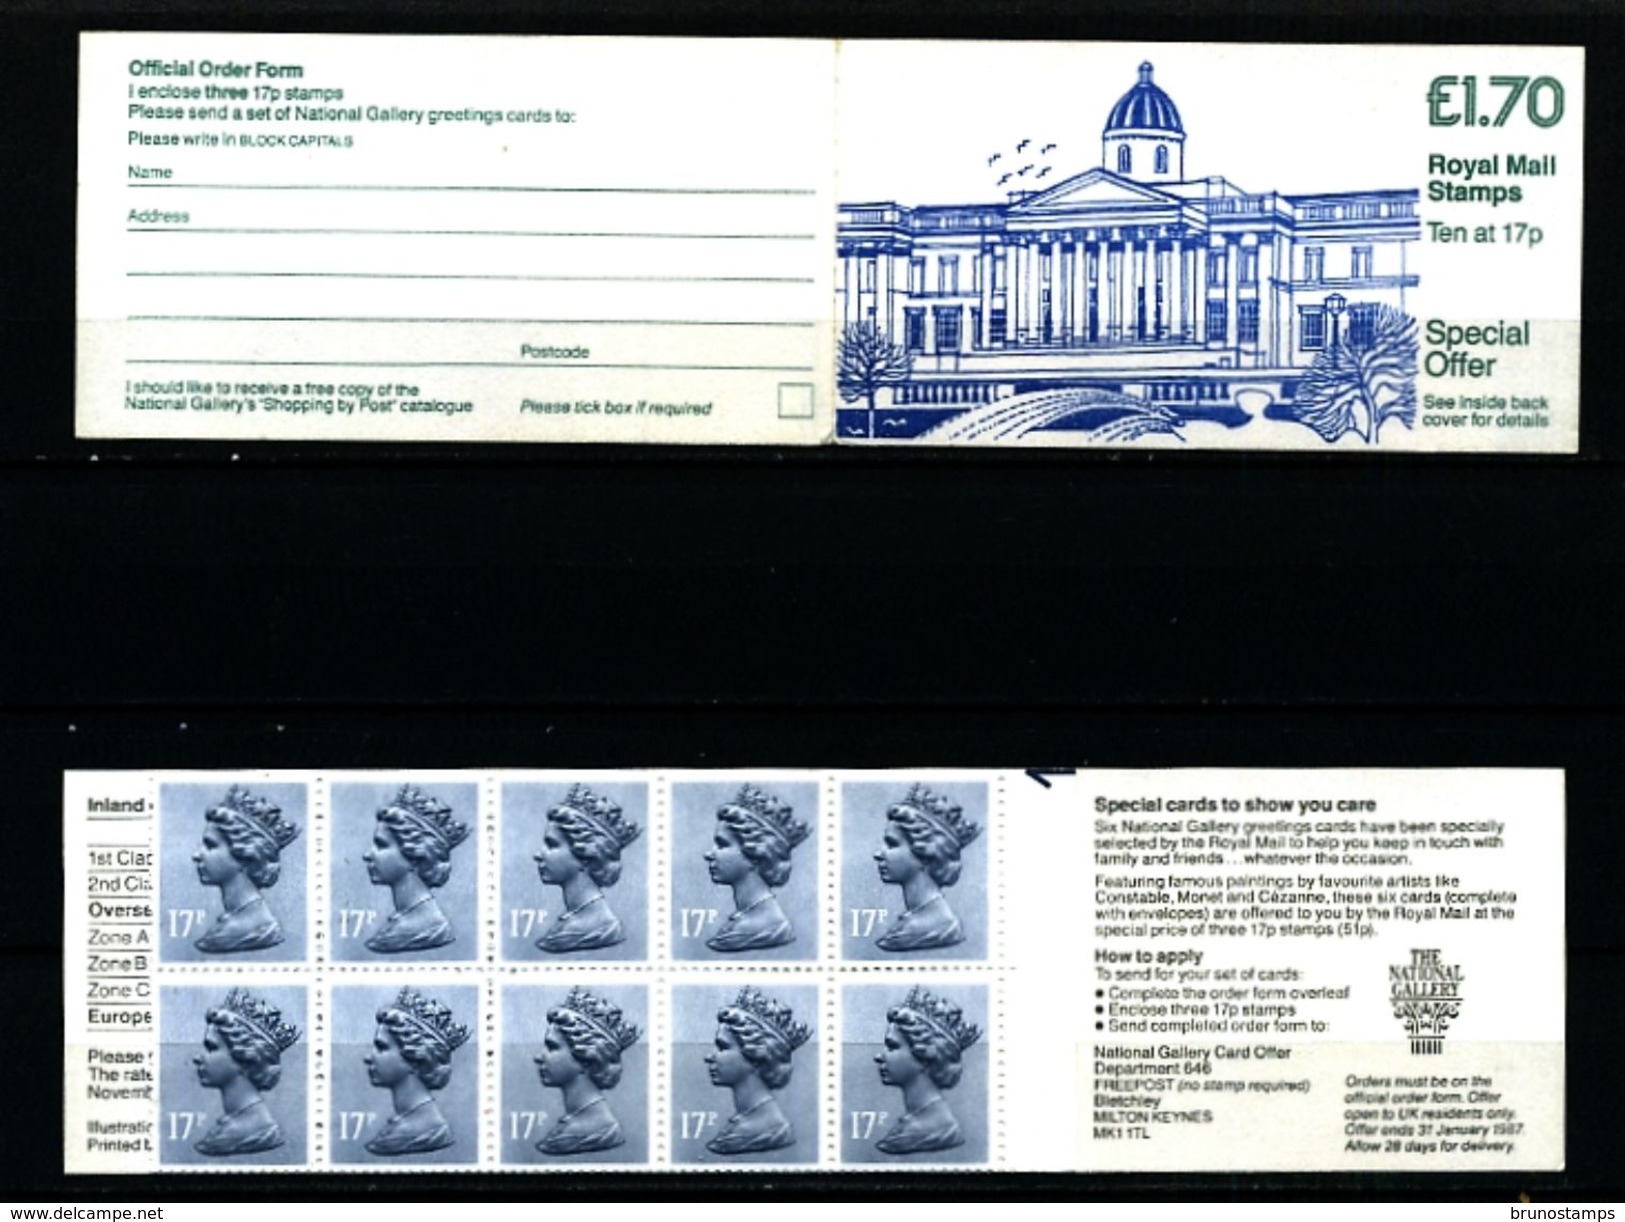 GREAT BRITAIN - 1985  £ 1.70  BOOKLET  NATIONAL GALLERY   RM  MINT NH  SG FT 6b - Libretti